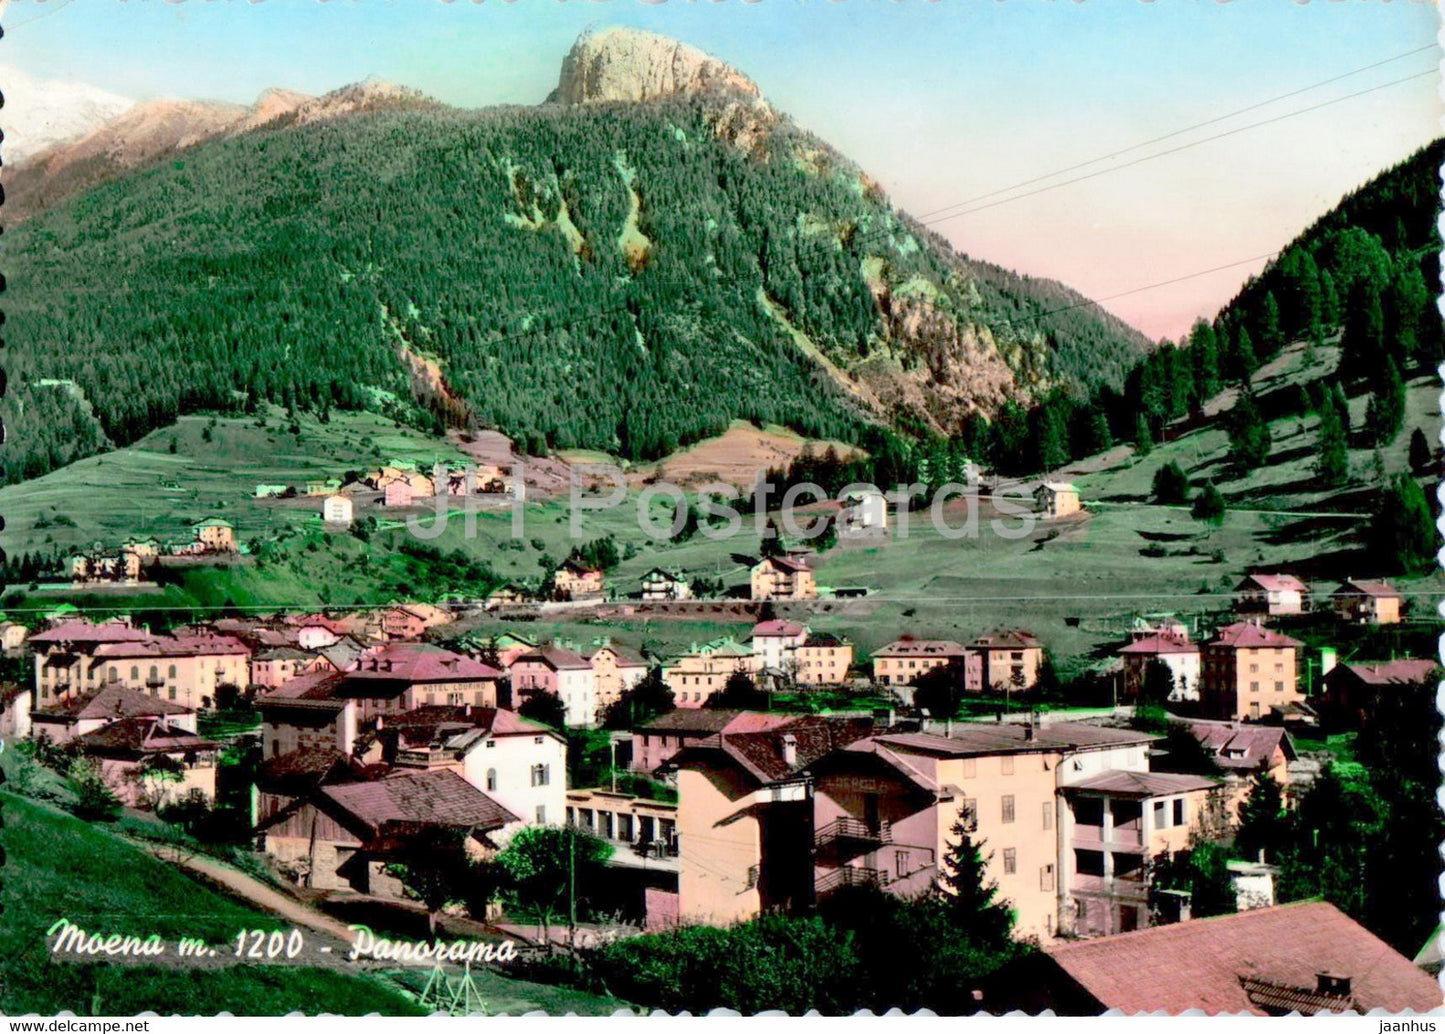 Moena 1200 m - Panorama - old postcard - Italy - used - JH Postcards